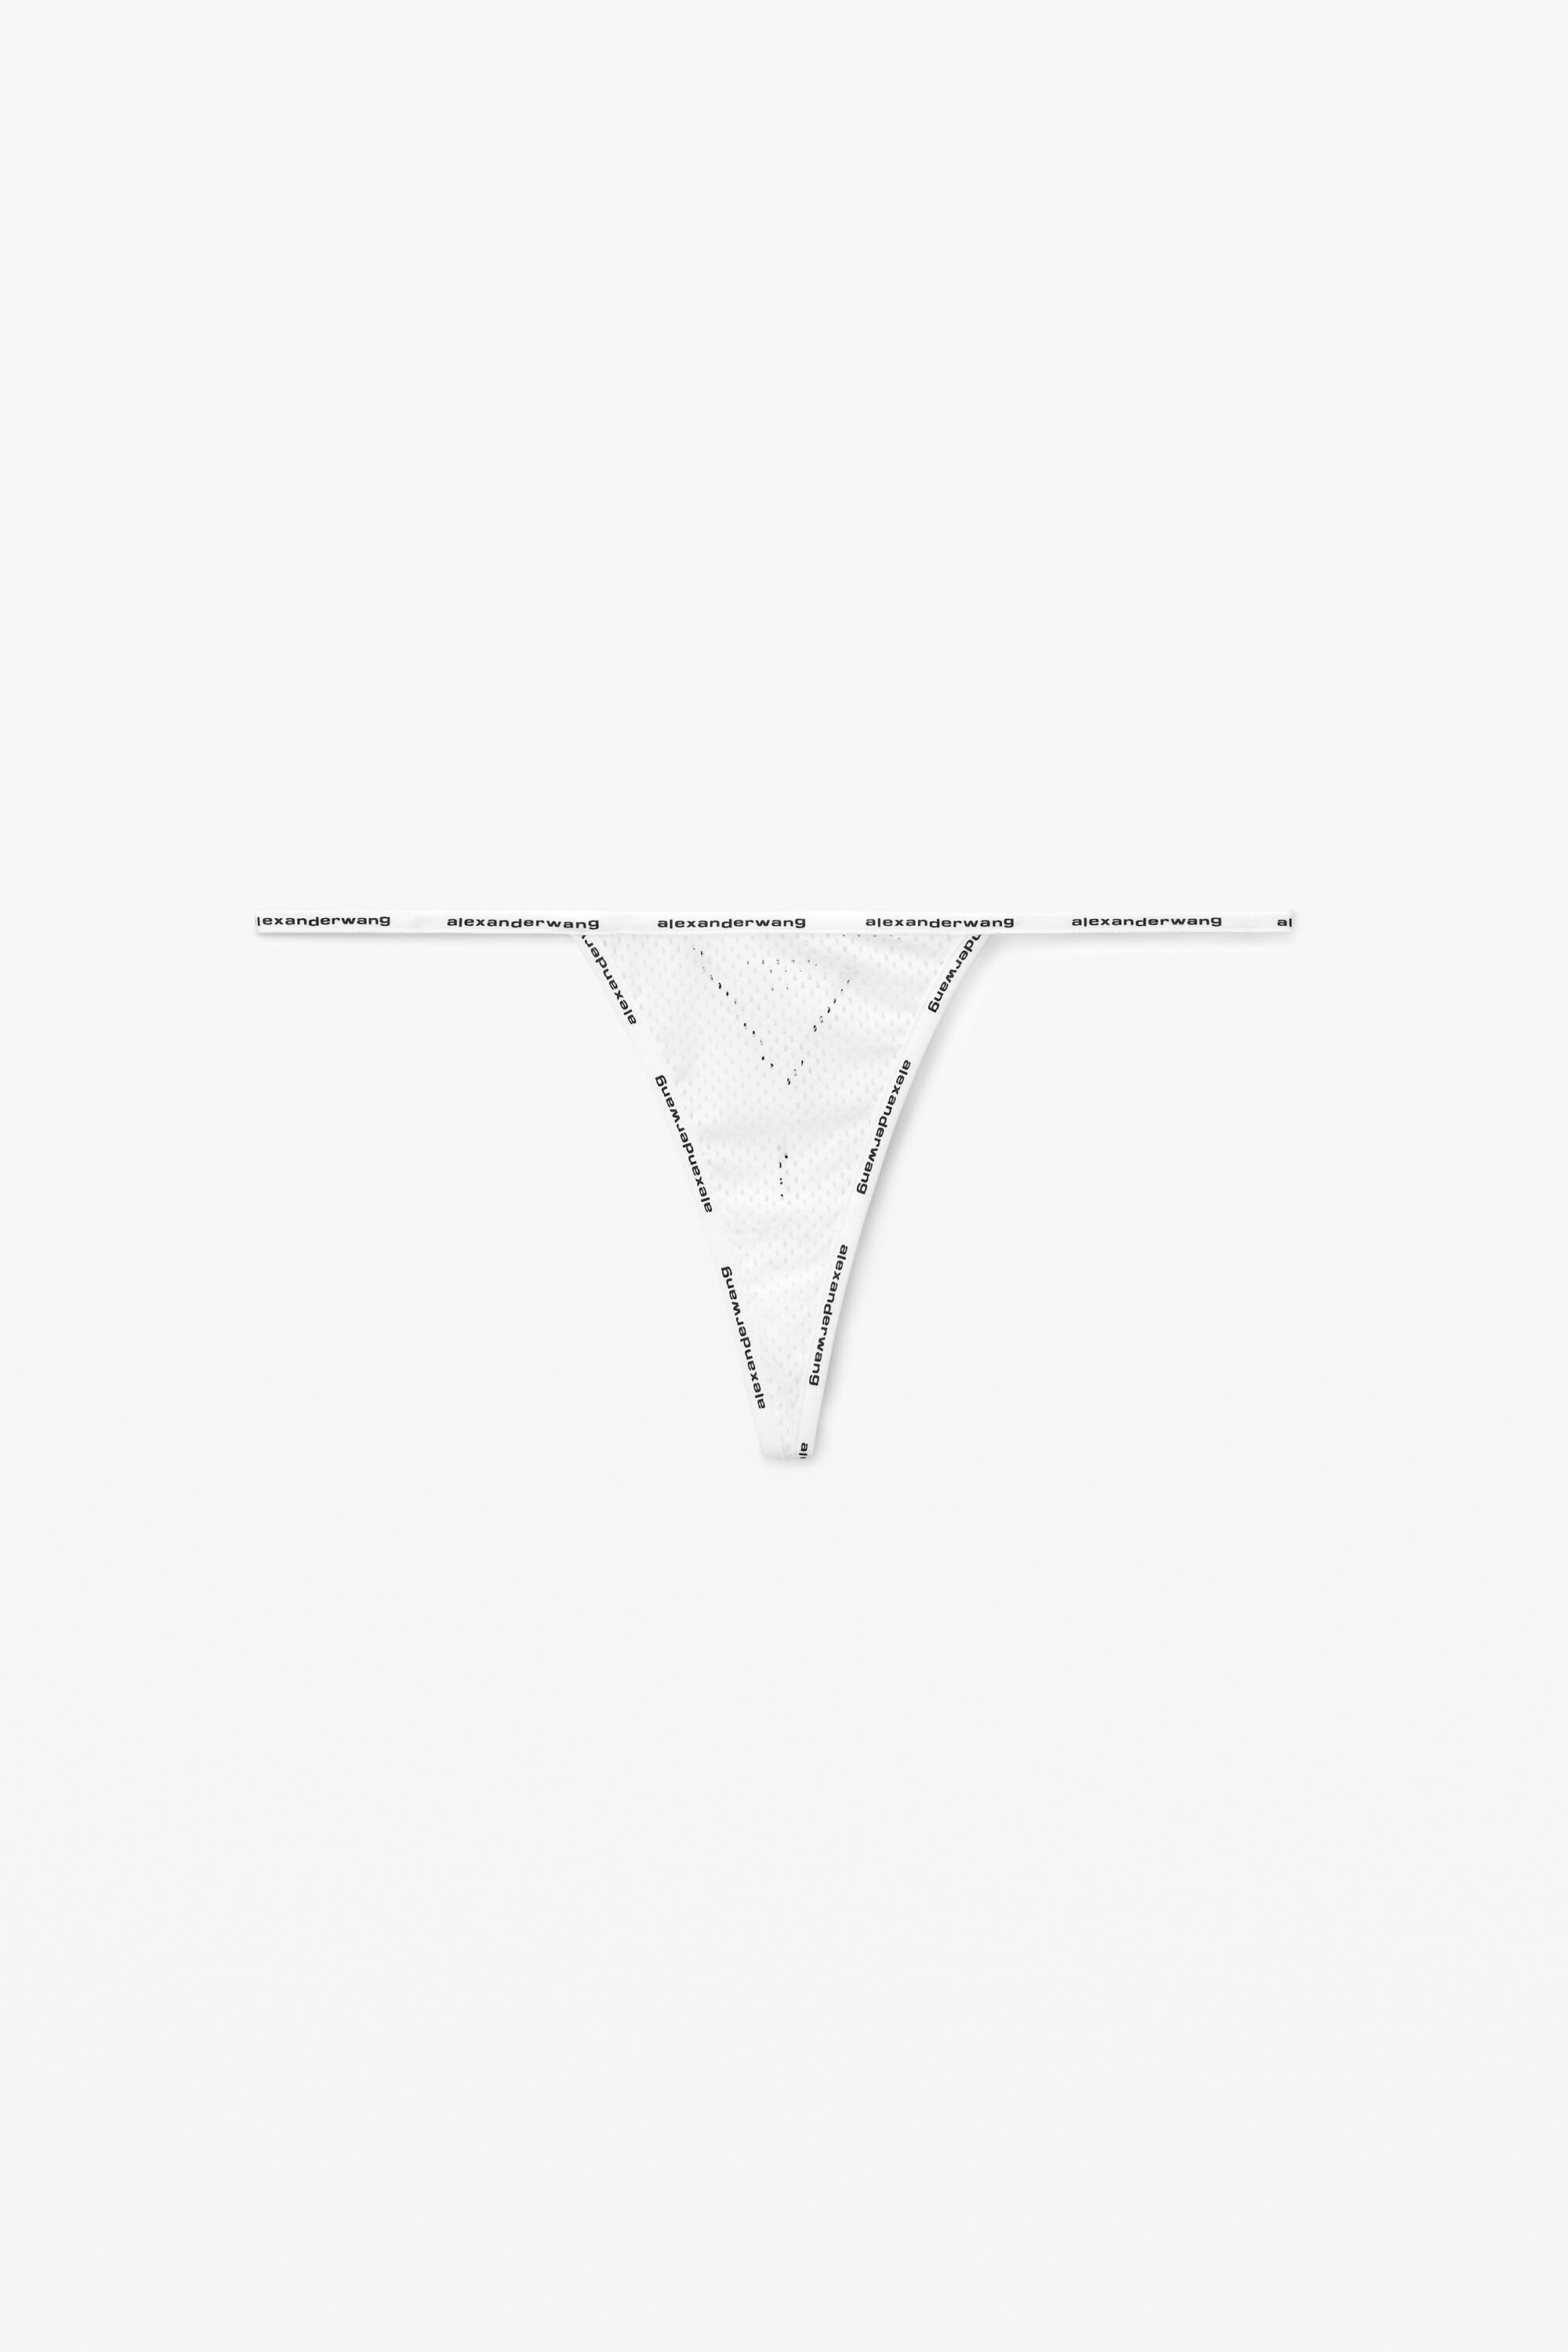 Shop Sale Clothing From Alexanderwang.t at SSENSE